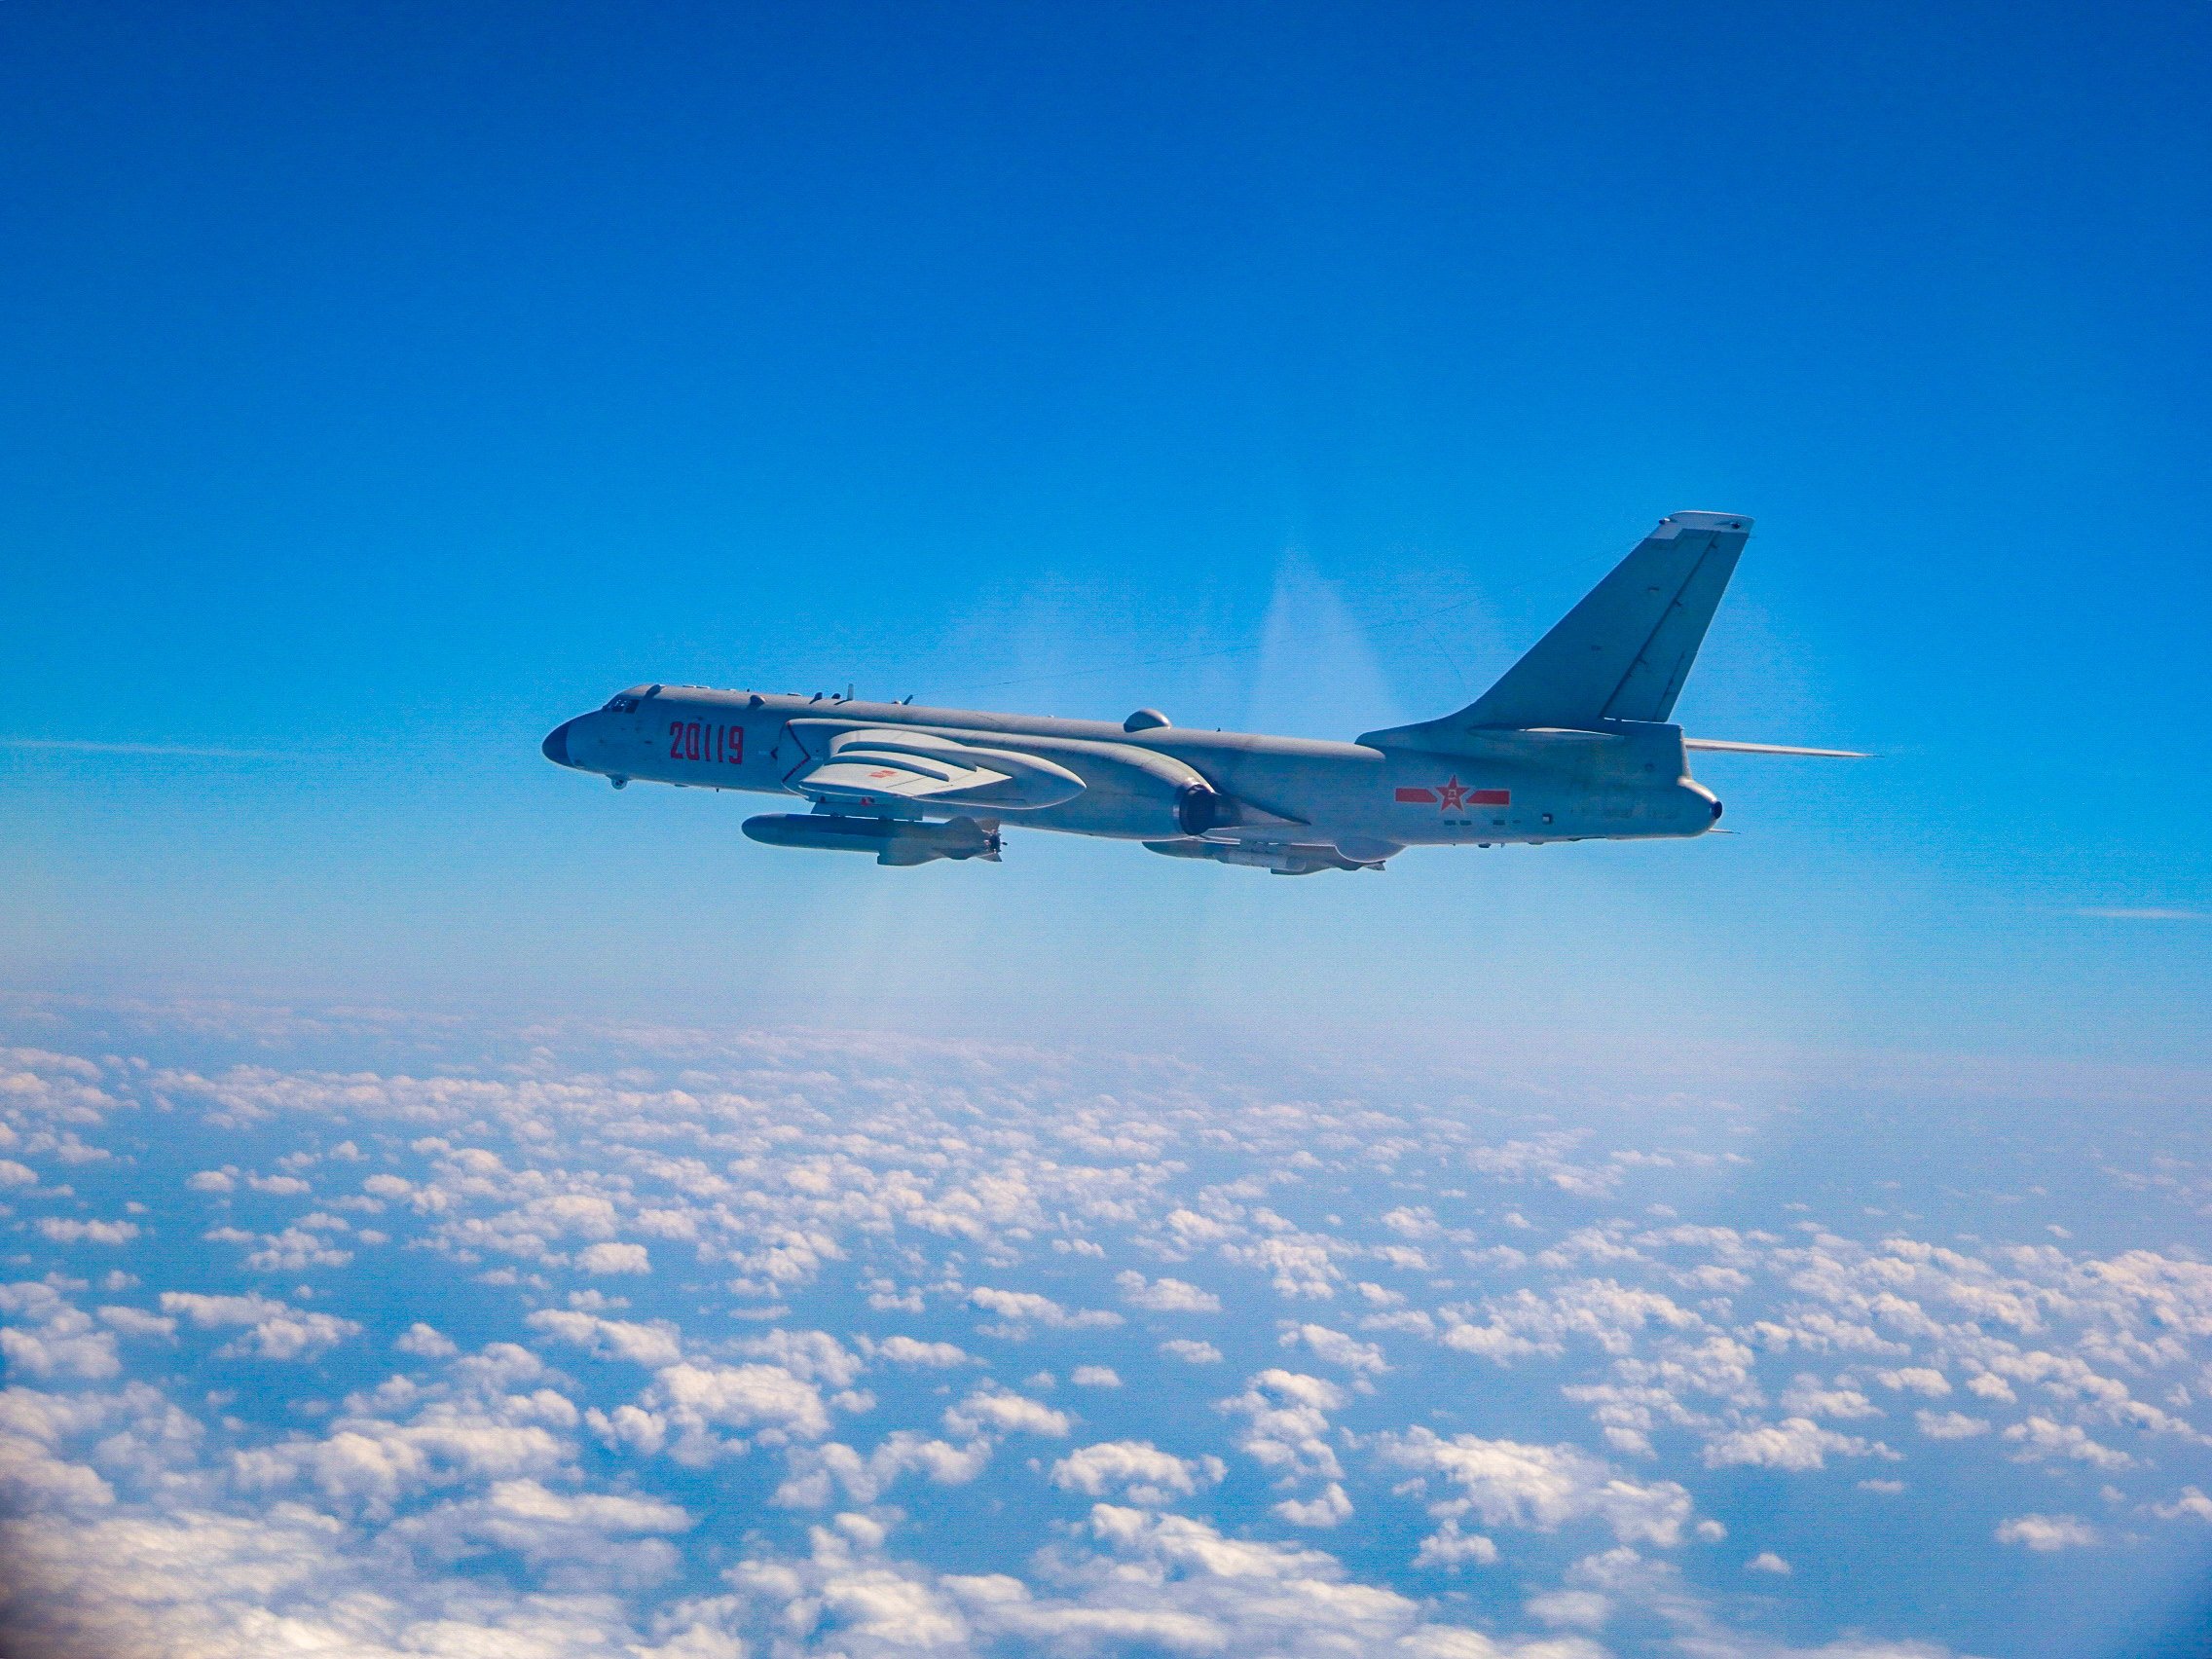 A Chinese H-6 bomber, similar to the PLA warplanes, was detected along with Russian aircraft in the Air Defence Identification Zone off the coast of Alaska on Wednesday. Photo: Handout